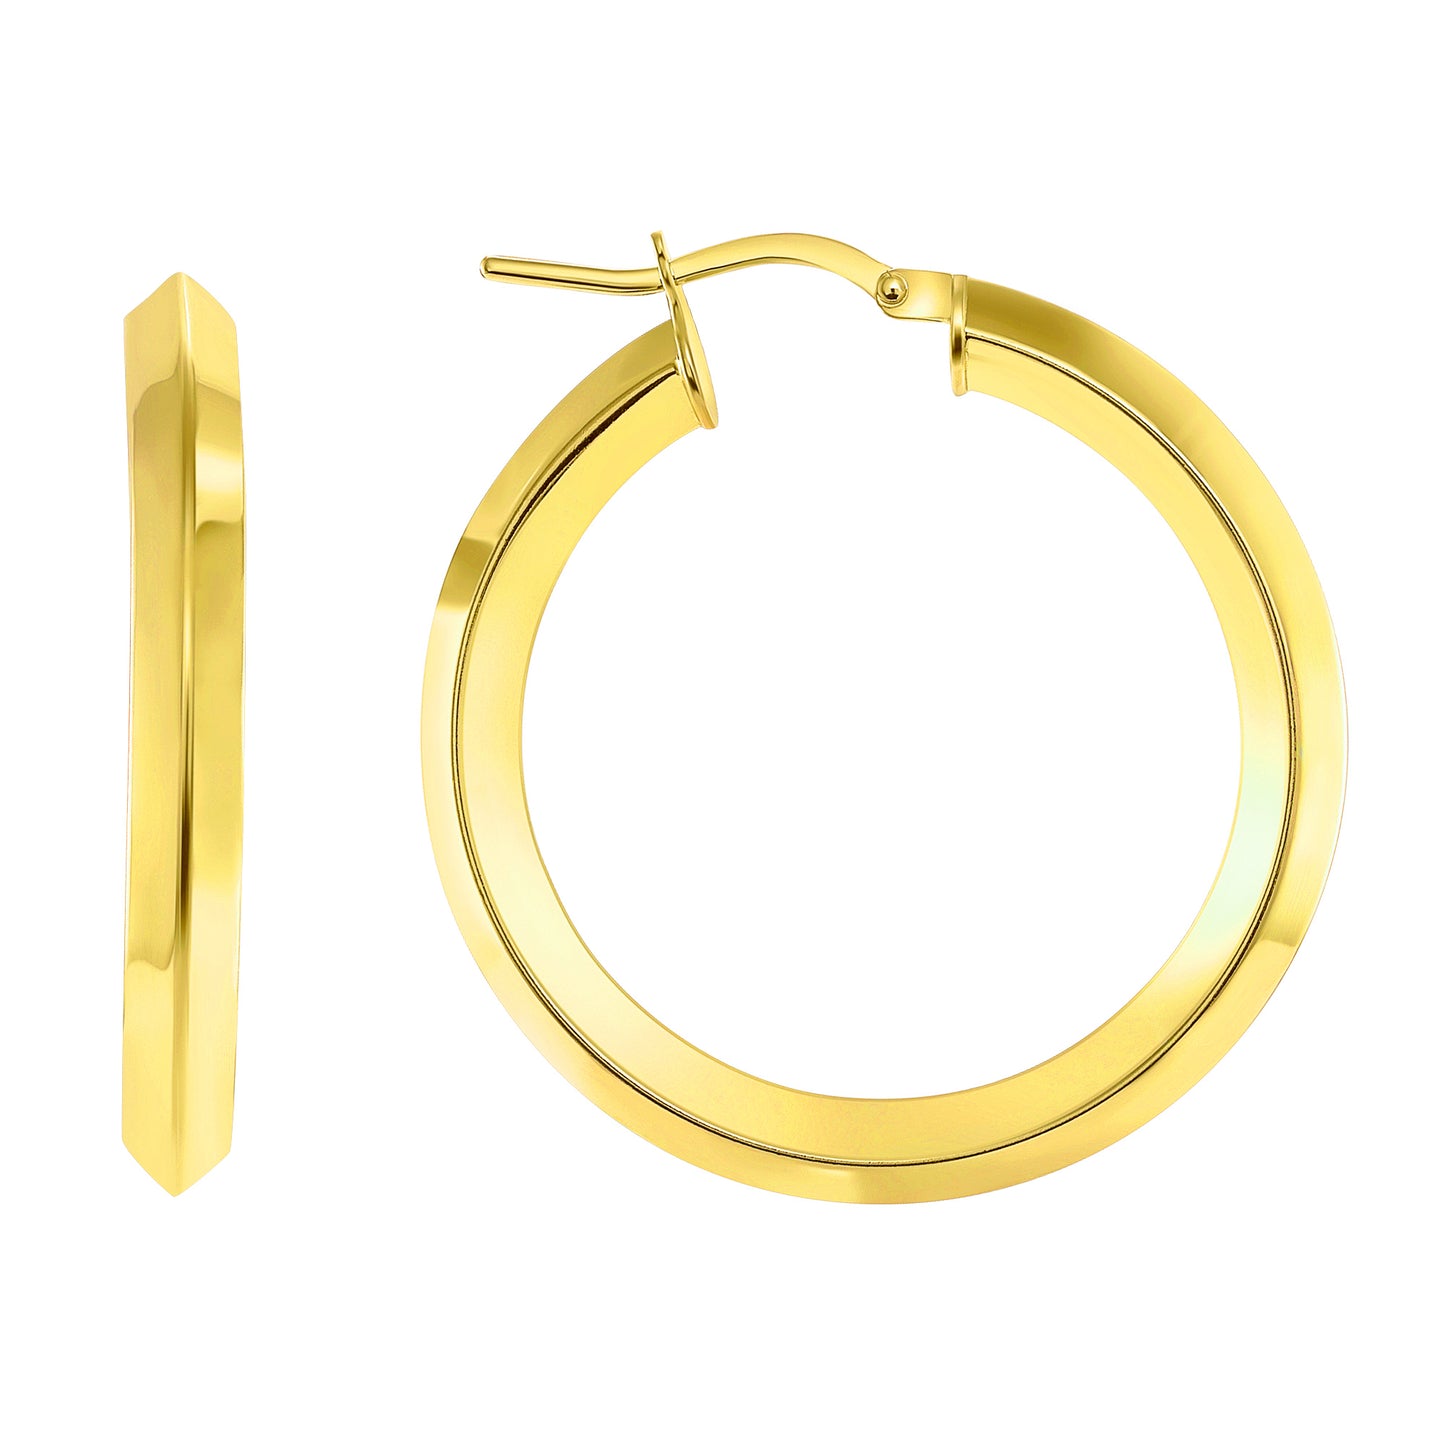 Silver 925 Gold Plated Plain 3D Design 25MM Hoop Earring. ITHP98-25MMG